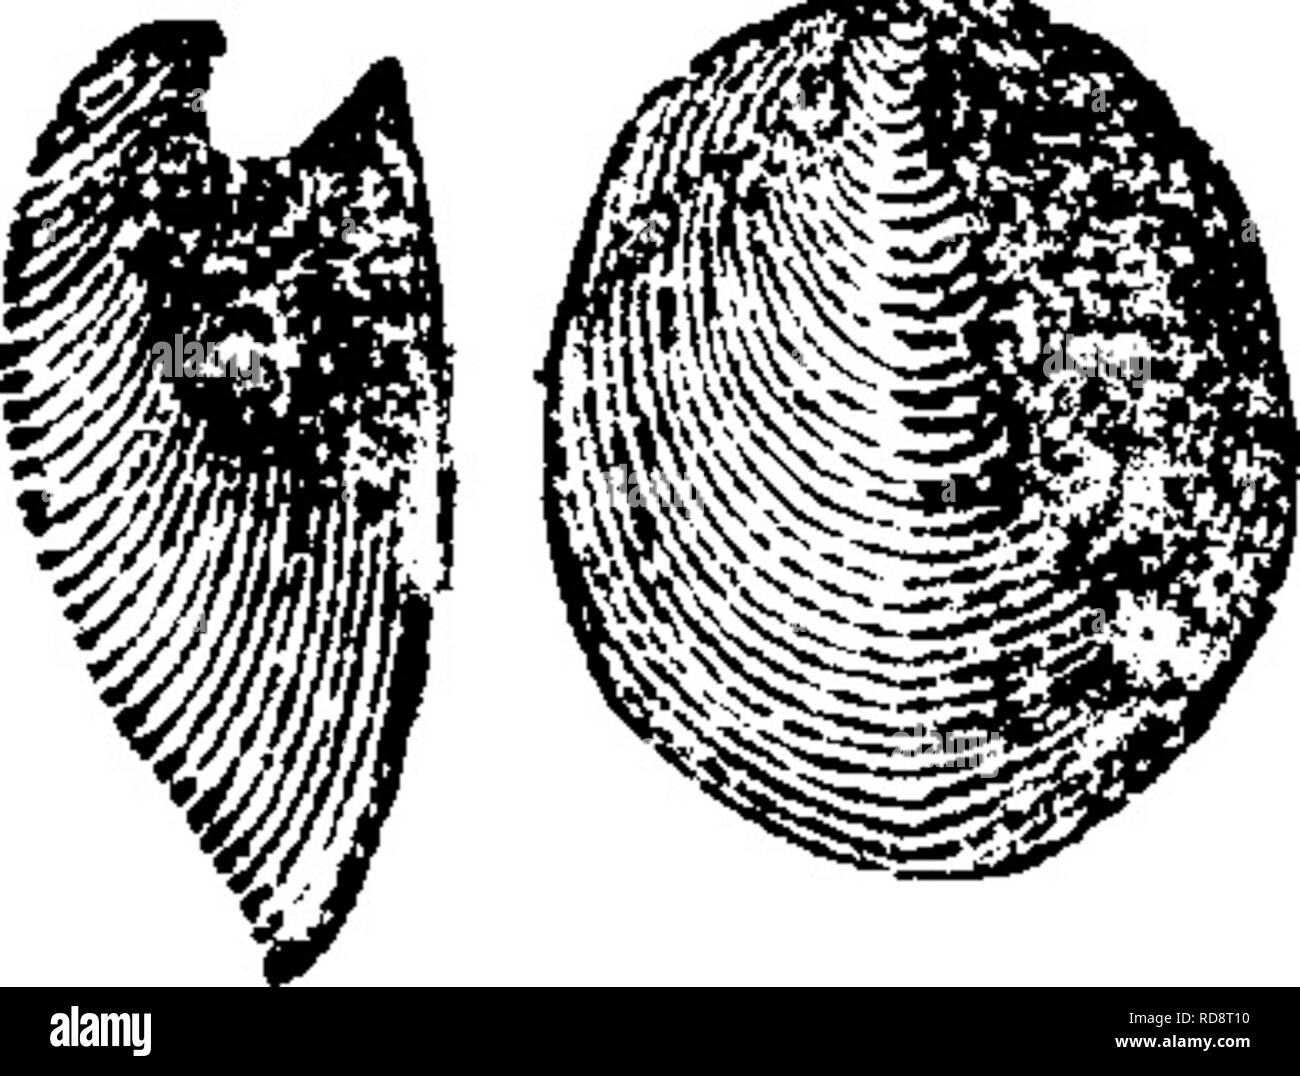 . A dictionary of the fossils of Pennsylvania and neighboring states named in the reports and catalogues of the survey ... Paleontology. 117 Card.. Geol. I, ii, 234, plate 13, fig. 8. Emmons named it Lyonsia vetusta,—Trenton formation, //(?.—(Note, fig. 9 has got upon this cut by mistake). Cardiomorpha zonata. Keported by I. C. White, at Huntingdon, Pa., in Hamilton upper shales.— VIII c Cardiopsis, in C. E. Hall's Ms. Kt., December 30,1876, as among Carll's collections in the oil regions. Upper Chemung. Cardium vetustum. See Cardiola vetusta, VIII f, Carinaropsis patelliformis, Hall, {Helcion Stock Photo